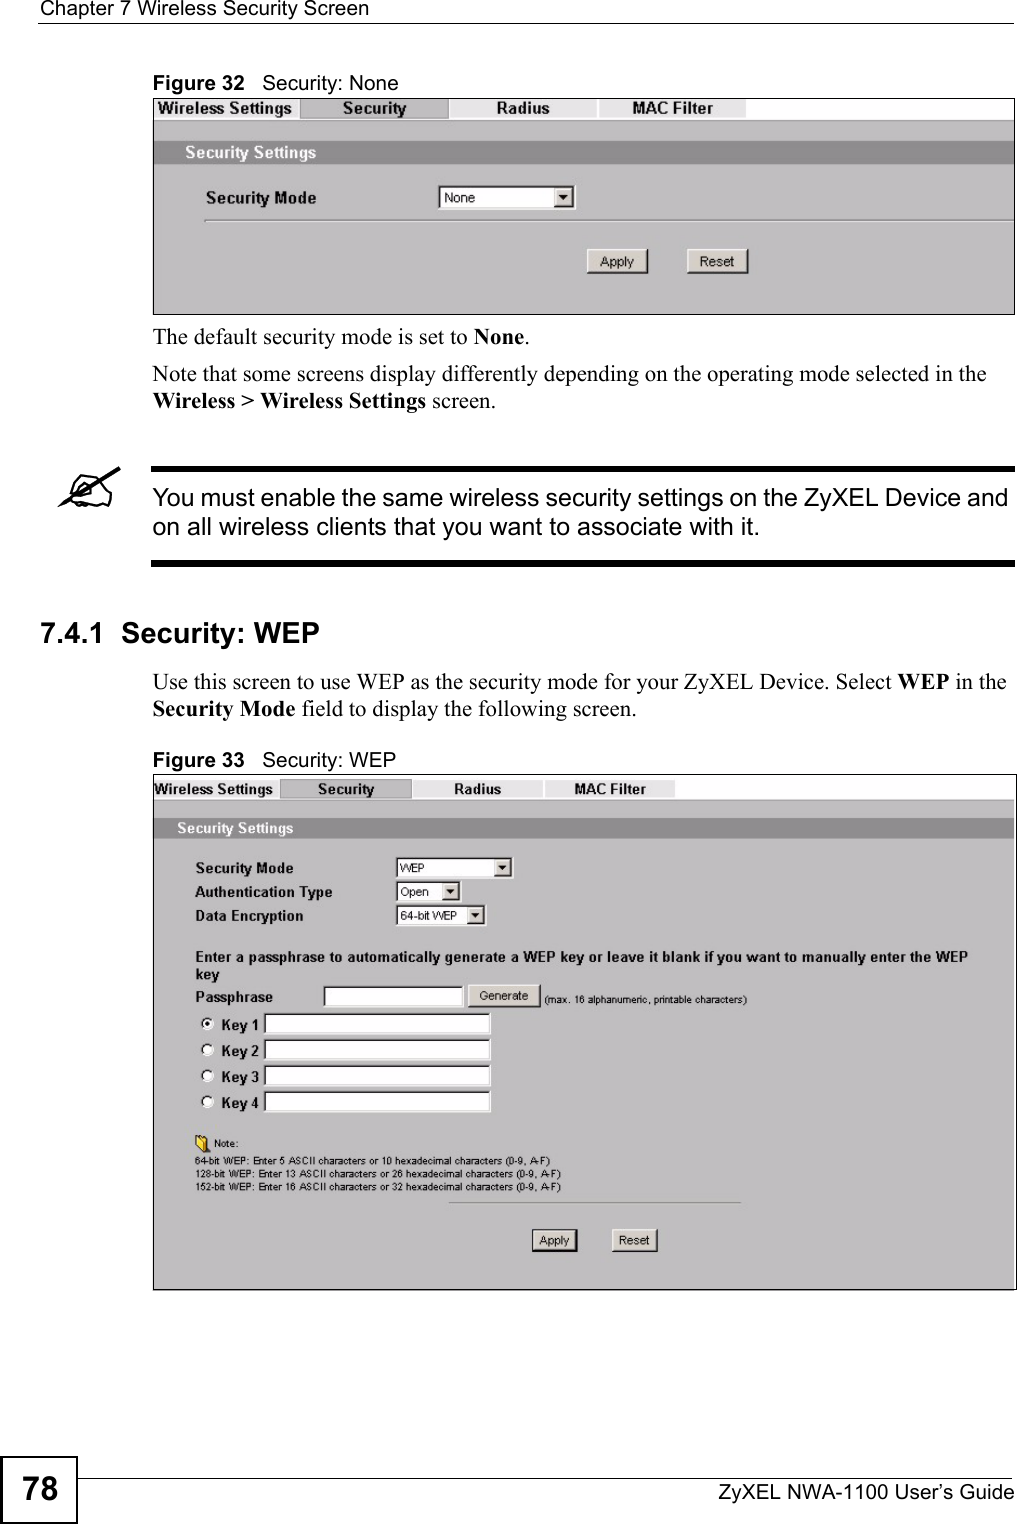 Chapter 7 Wireless Security ScreenZyXEL NWA-1100 User’s Guide78Figure 32   Security: NoneThe default security mode is set to None.Note that some screens display differently depending on the operating mode selected in the Wireless &gt; Wireless Settings screen. &quot;You must enable the same wireless security settings on the ZyXEL Device and on all wireless clients that you want to associate with it. 7.4.1  Security: WEPUse this screen to use WEP as the security mode for your ZyXEL Device. Select WEP in the Security Mode field to display the following screen.Figure 33   Security: WEP